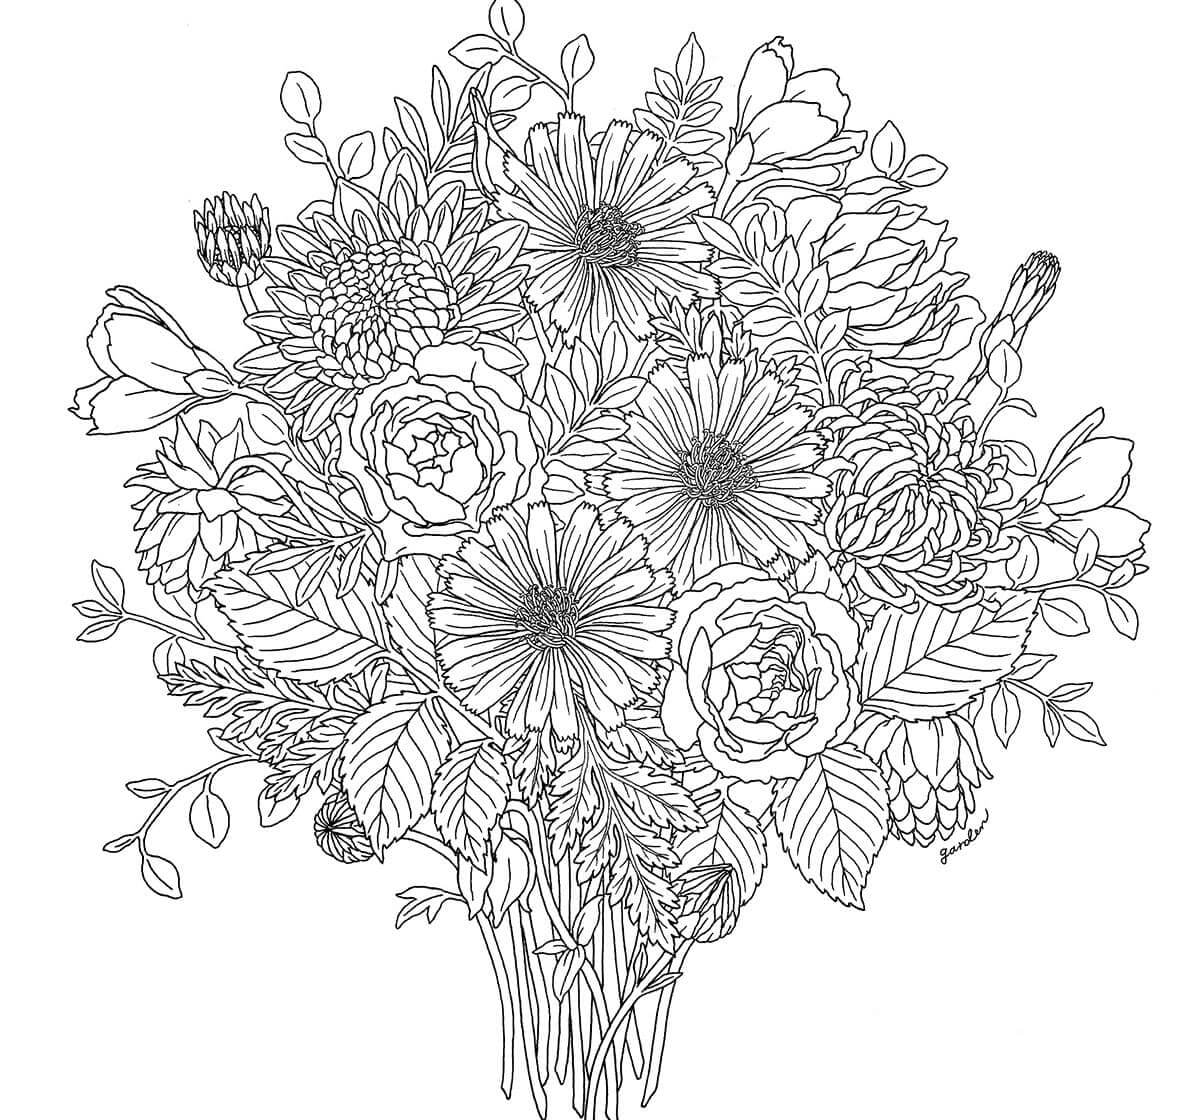 beautiful flower flower coloring pages for adults | flower mandala coloring pages for adults | flower garden coloring pages for adults